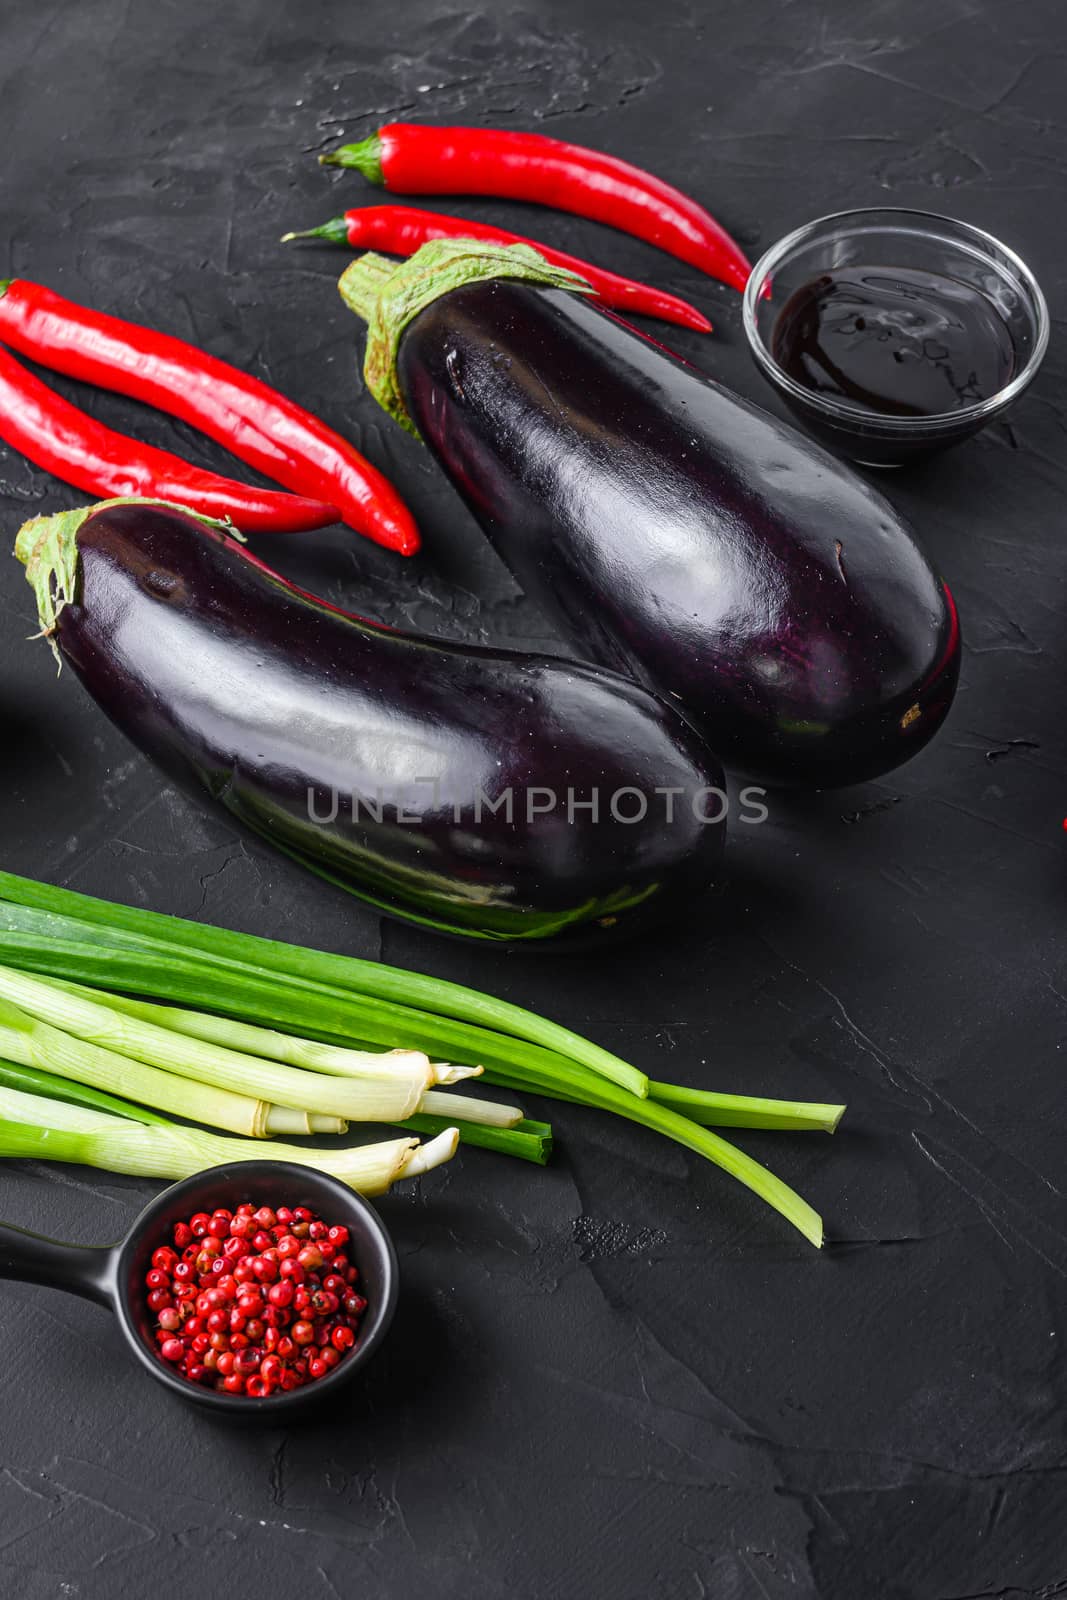 Sticky teriyaki aubergine ingredients, for cooking or grill chili pepper, eggplant, sauce, nuts on black background side view. by Ilianesolenyi